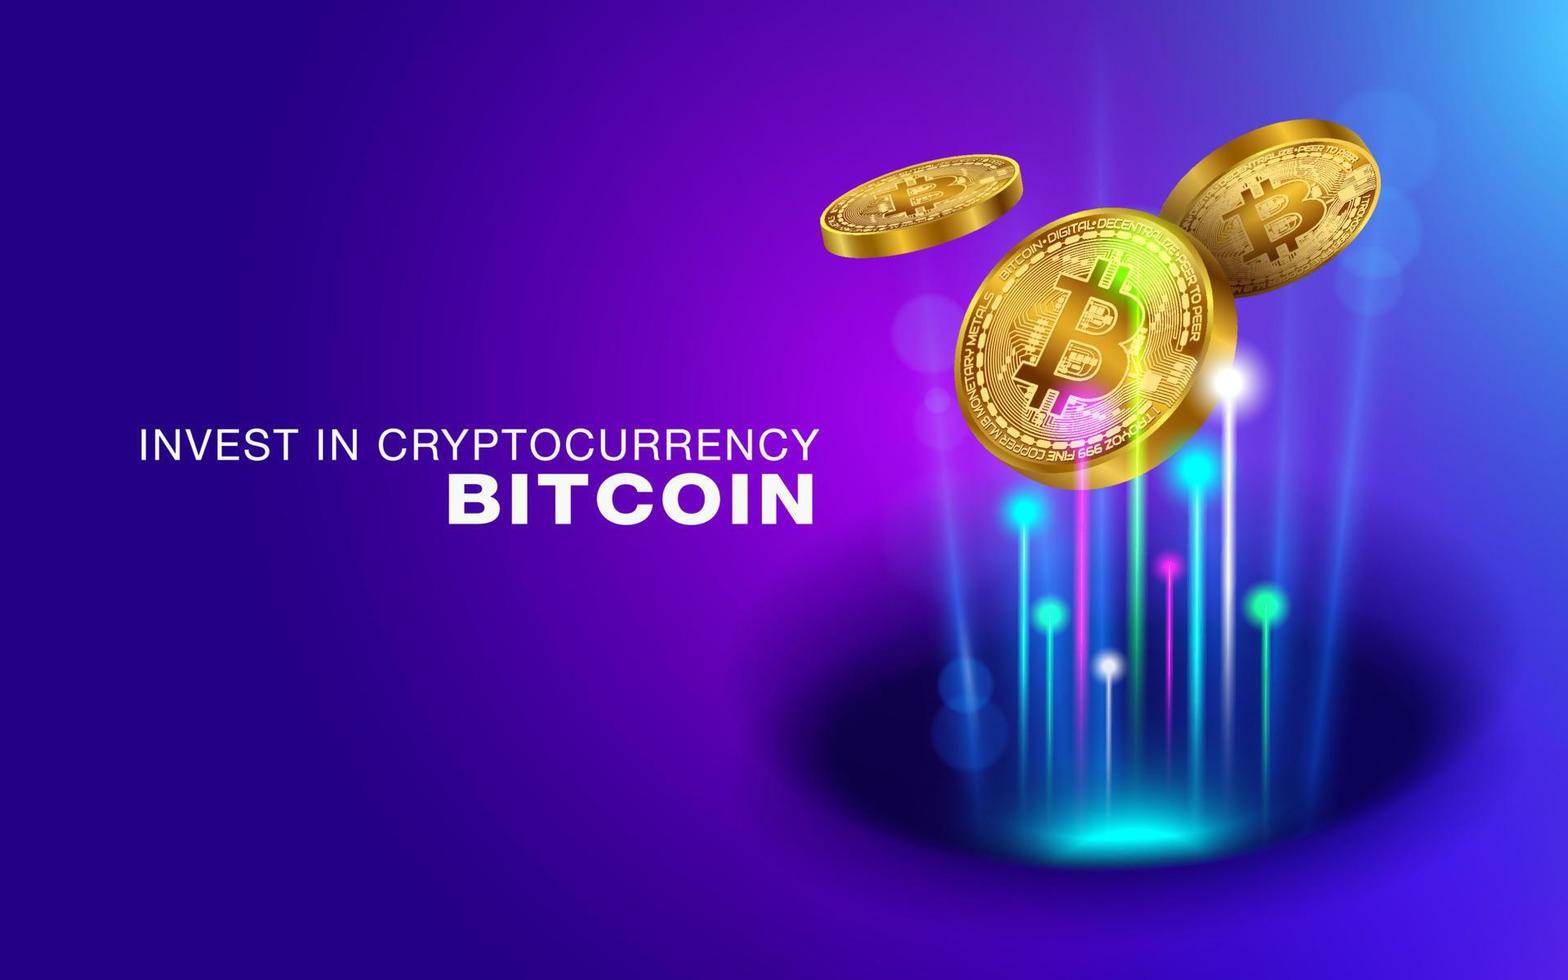 Invest in bitcoin cryptocurrency future money digital. use blockchain technology Decentralized investment process, money making traders, landing page templates. vector